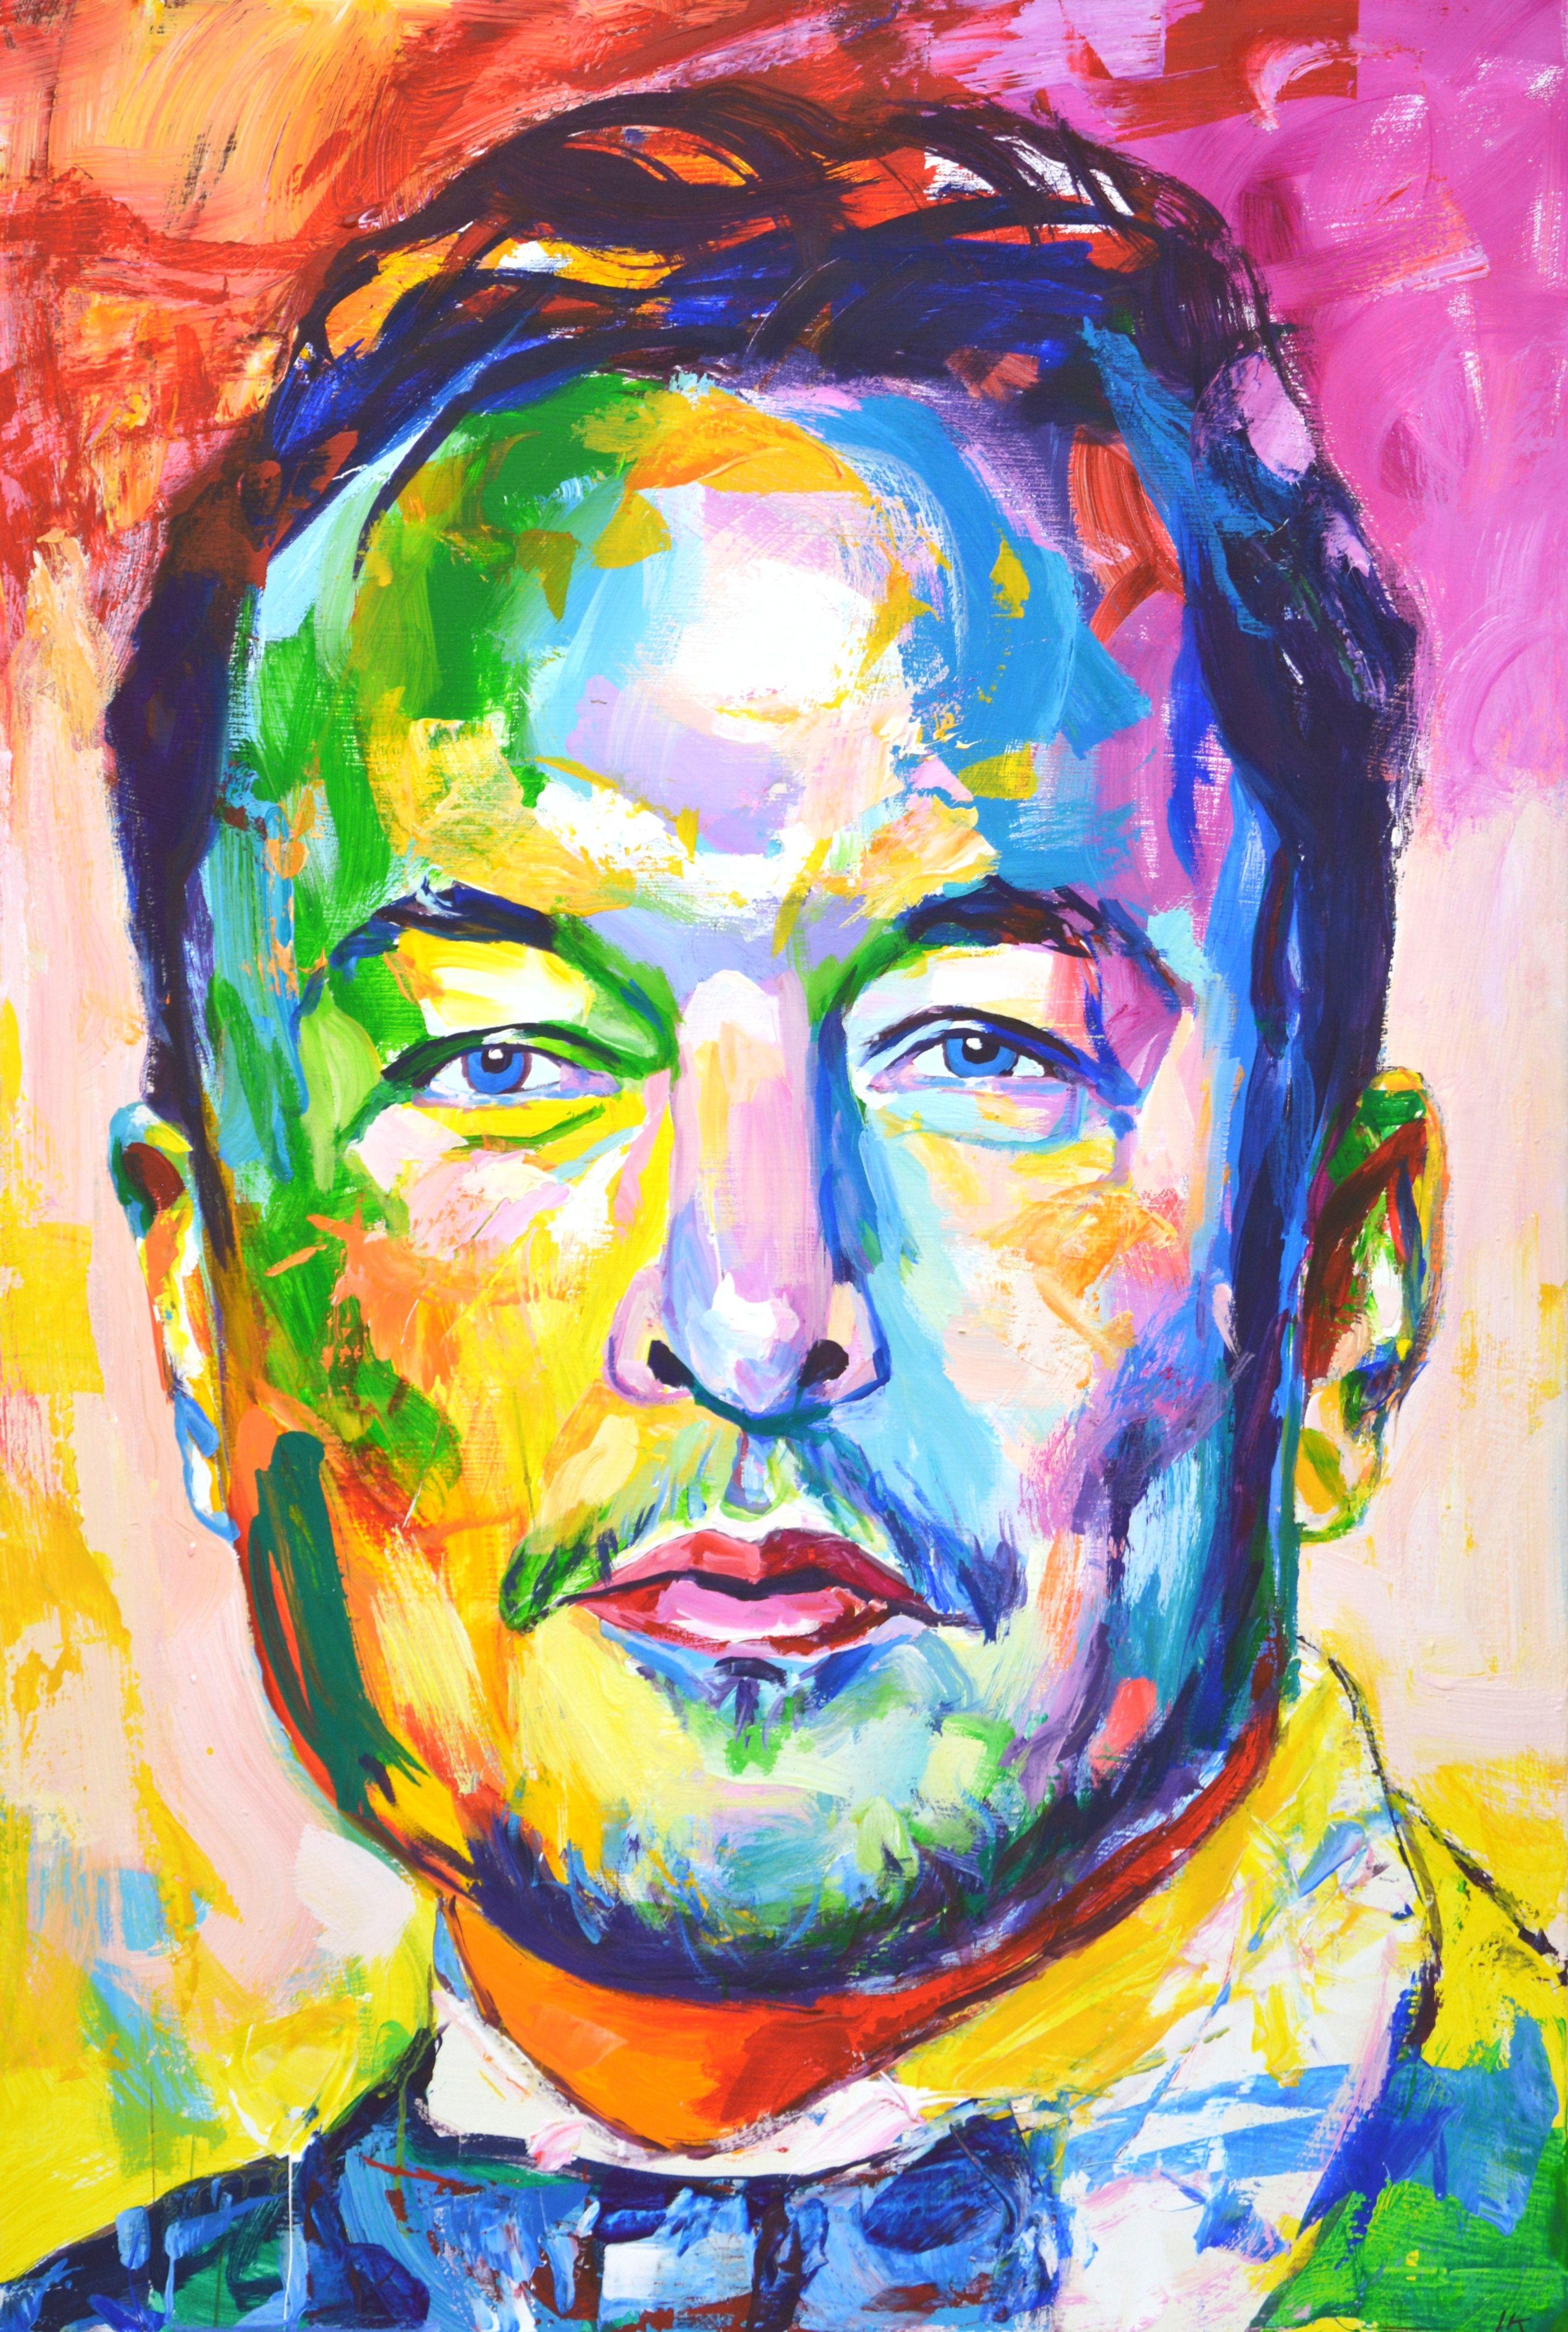 Elon Reeve Musk is an American entrepreneur, engineer and billionaire. He is the founder, CEO and chief engineer of SpaceX; Tesla investor, CEO and product architect; founder of The Boring Company and co-founder of Neuralink and OpenAI. I painted in